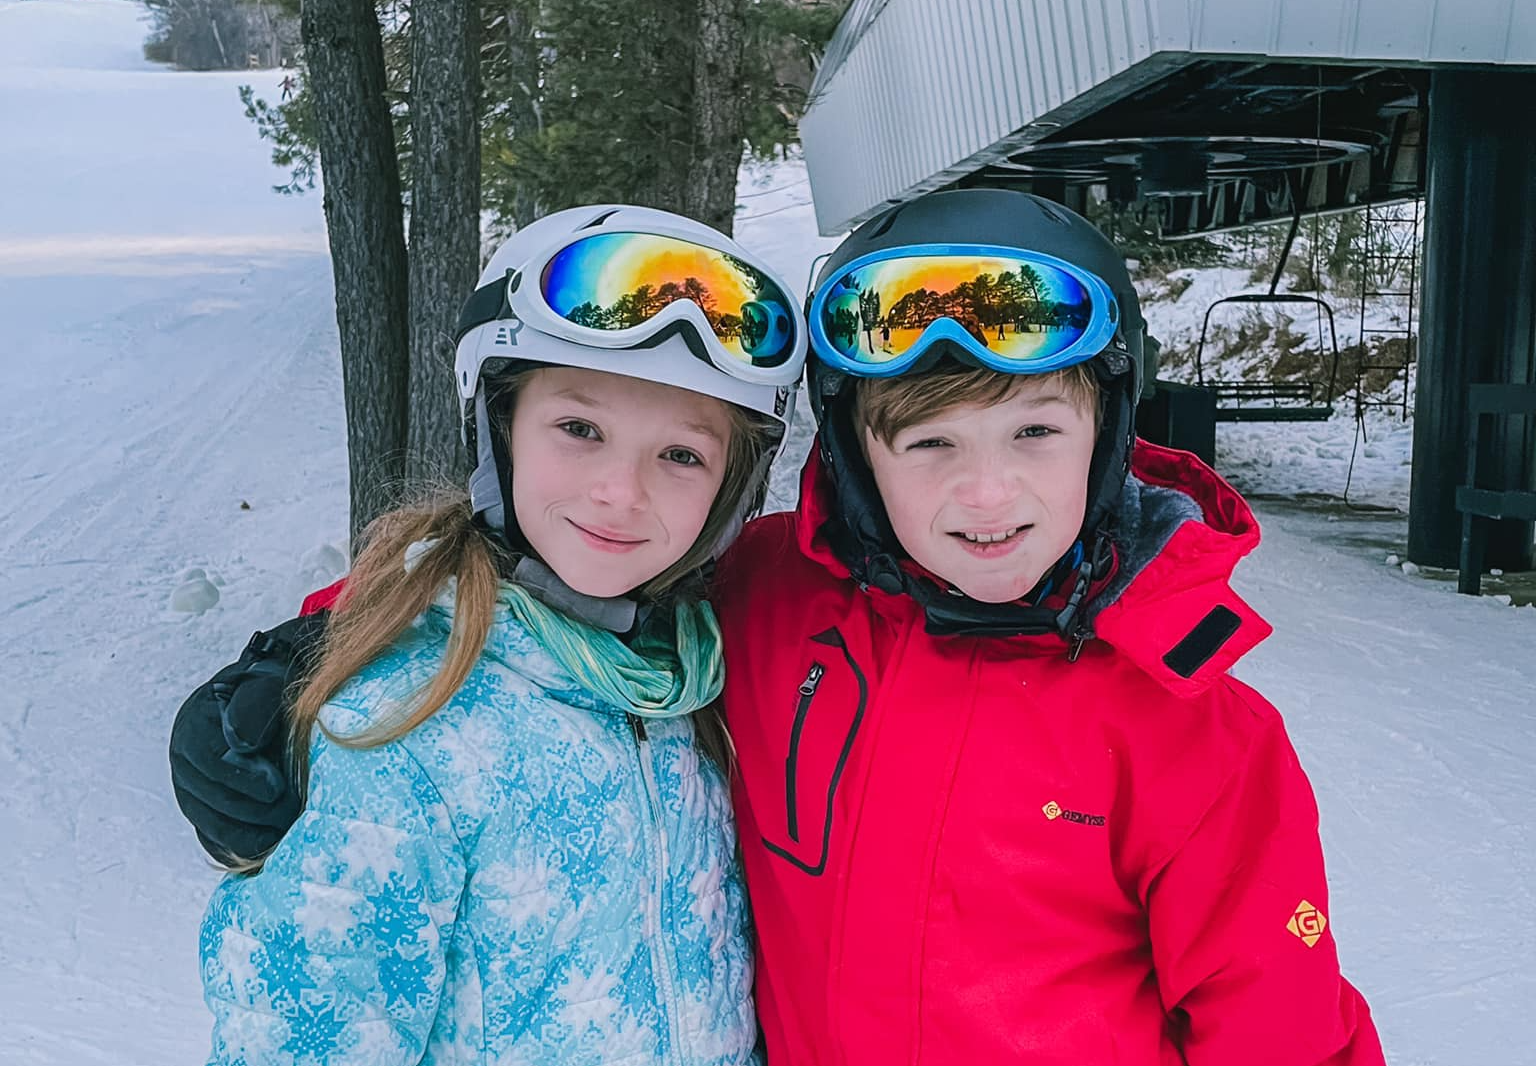 Brother and sister at Alpine Valley